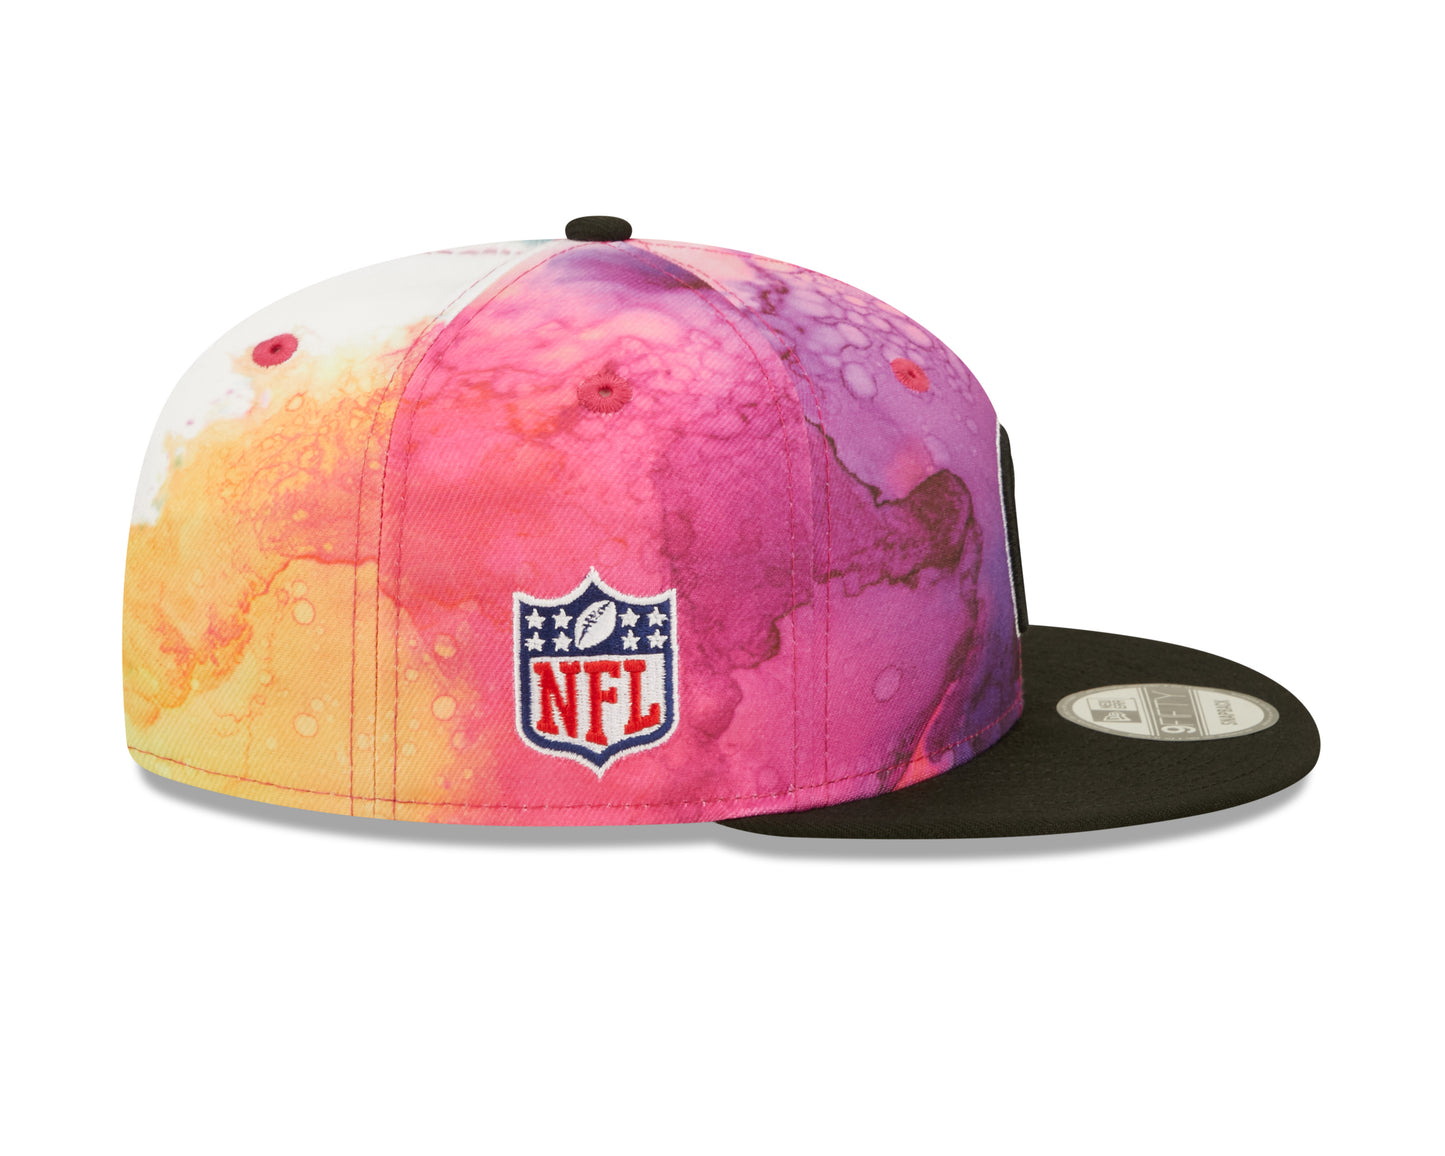 Pittsburgh Steelers New Era Sideline Crucial Catch 9Fifty Hat- Ink Pink